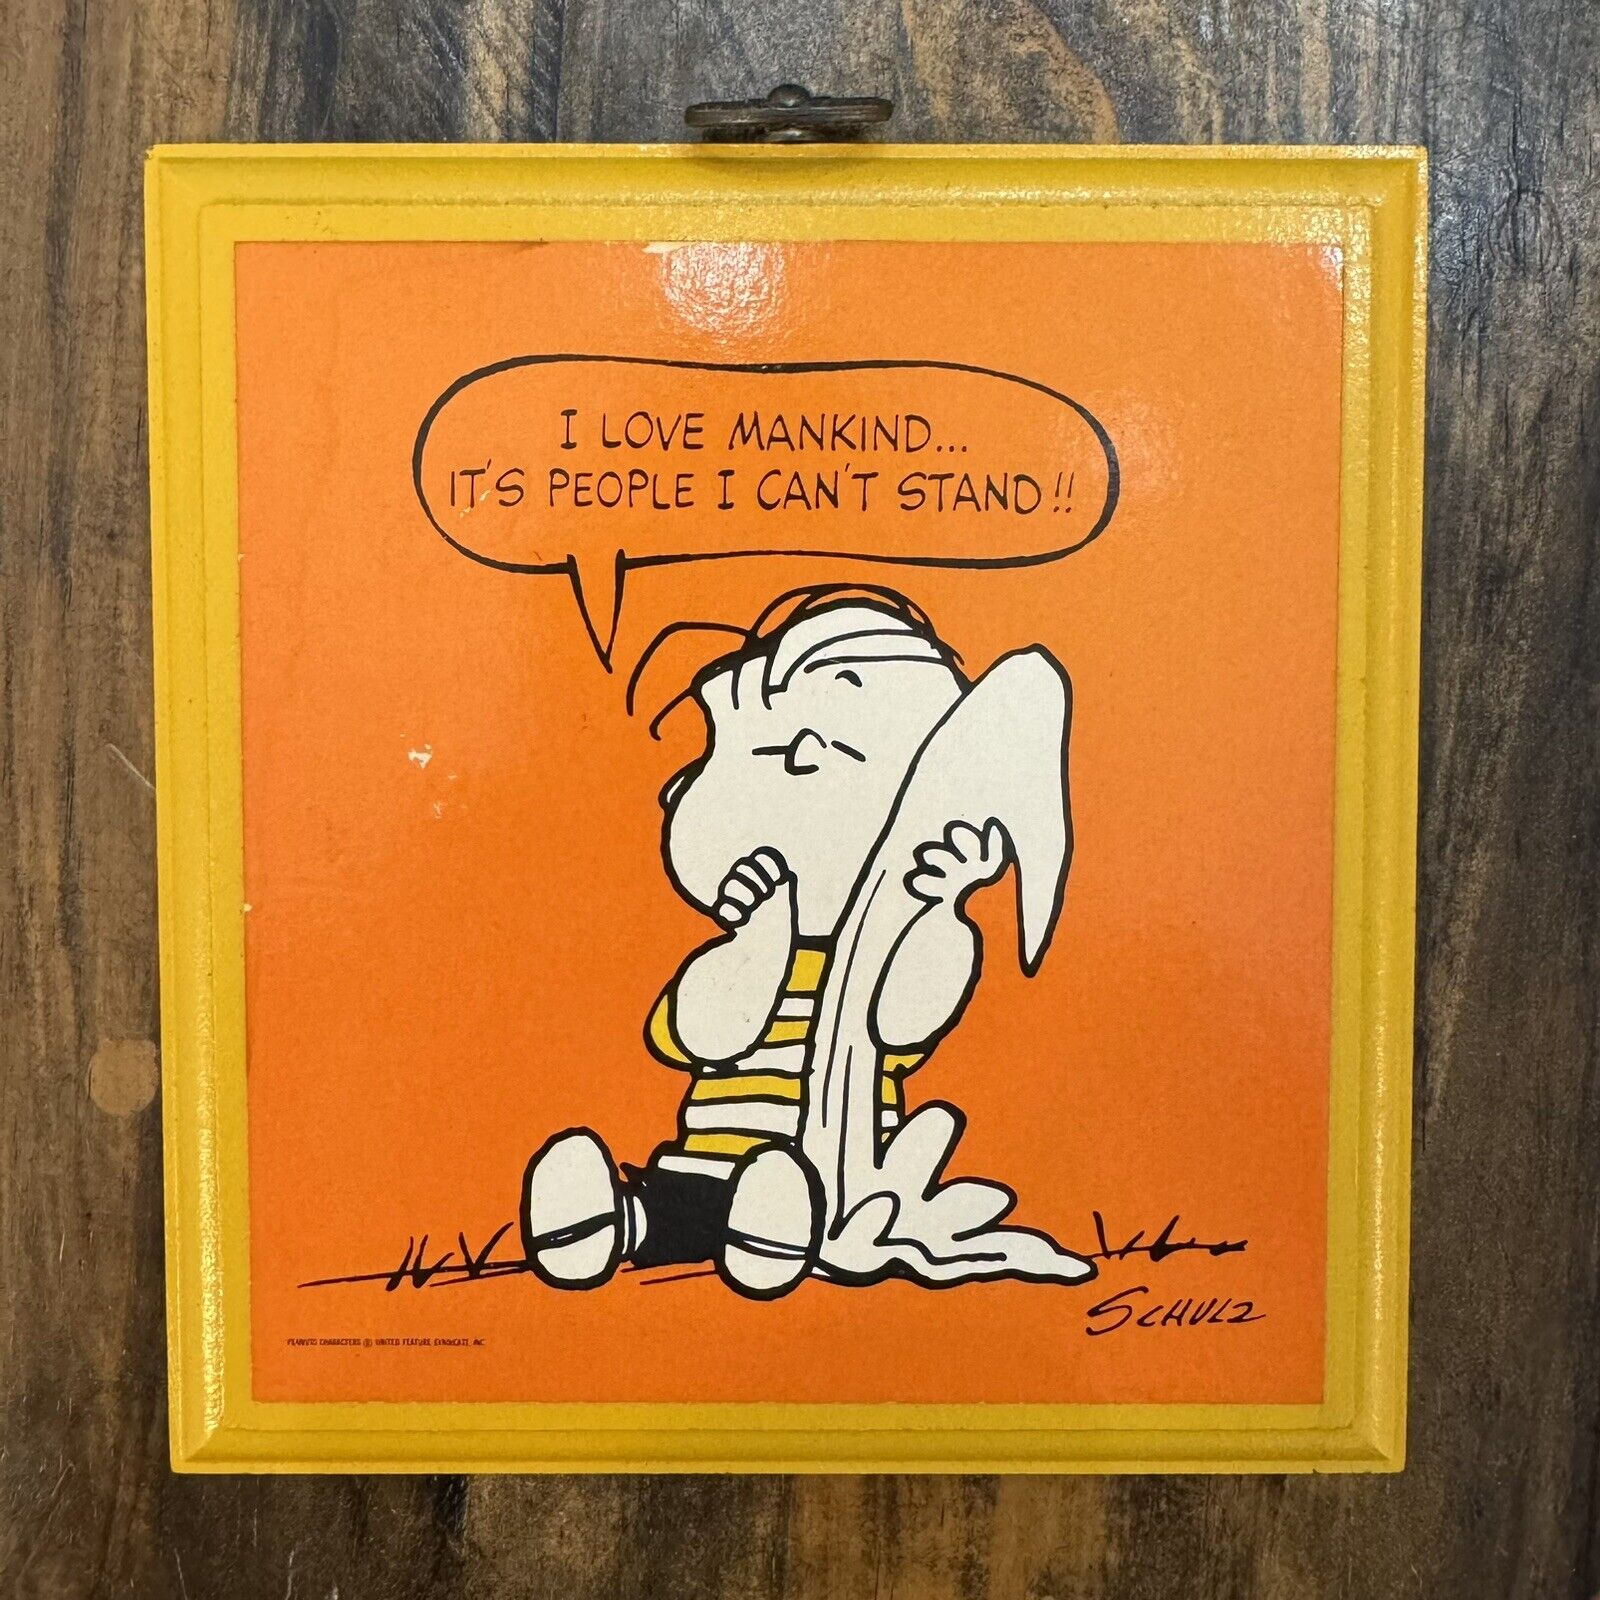 Vintage Peanuts Wall Plaque Hanging Linus Love Mankind People Cant Stand Schuz